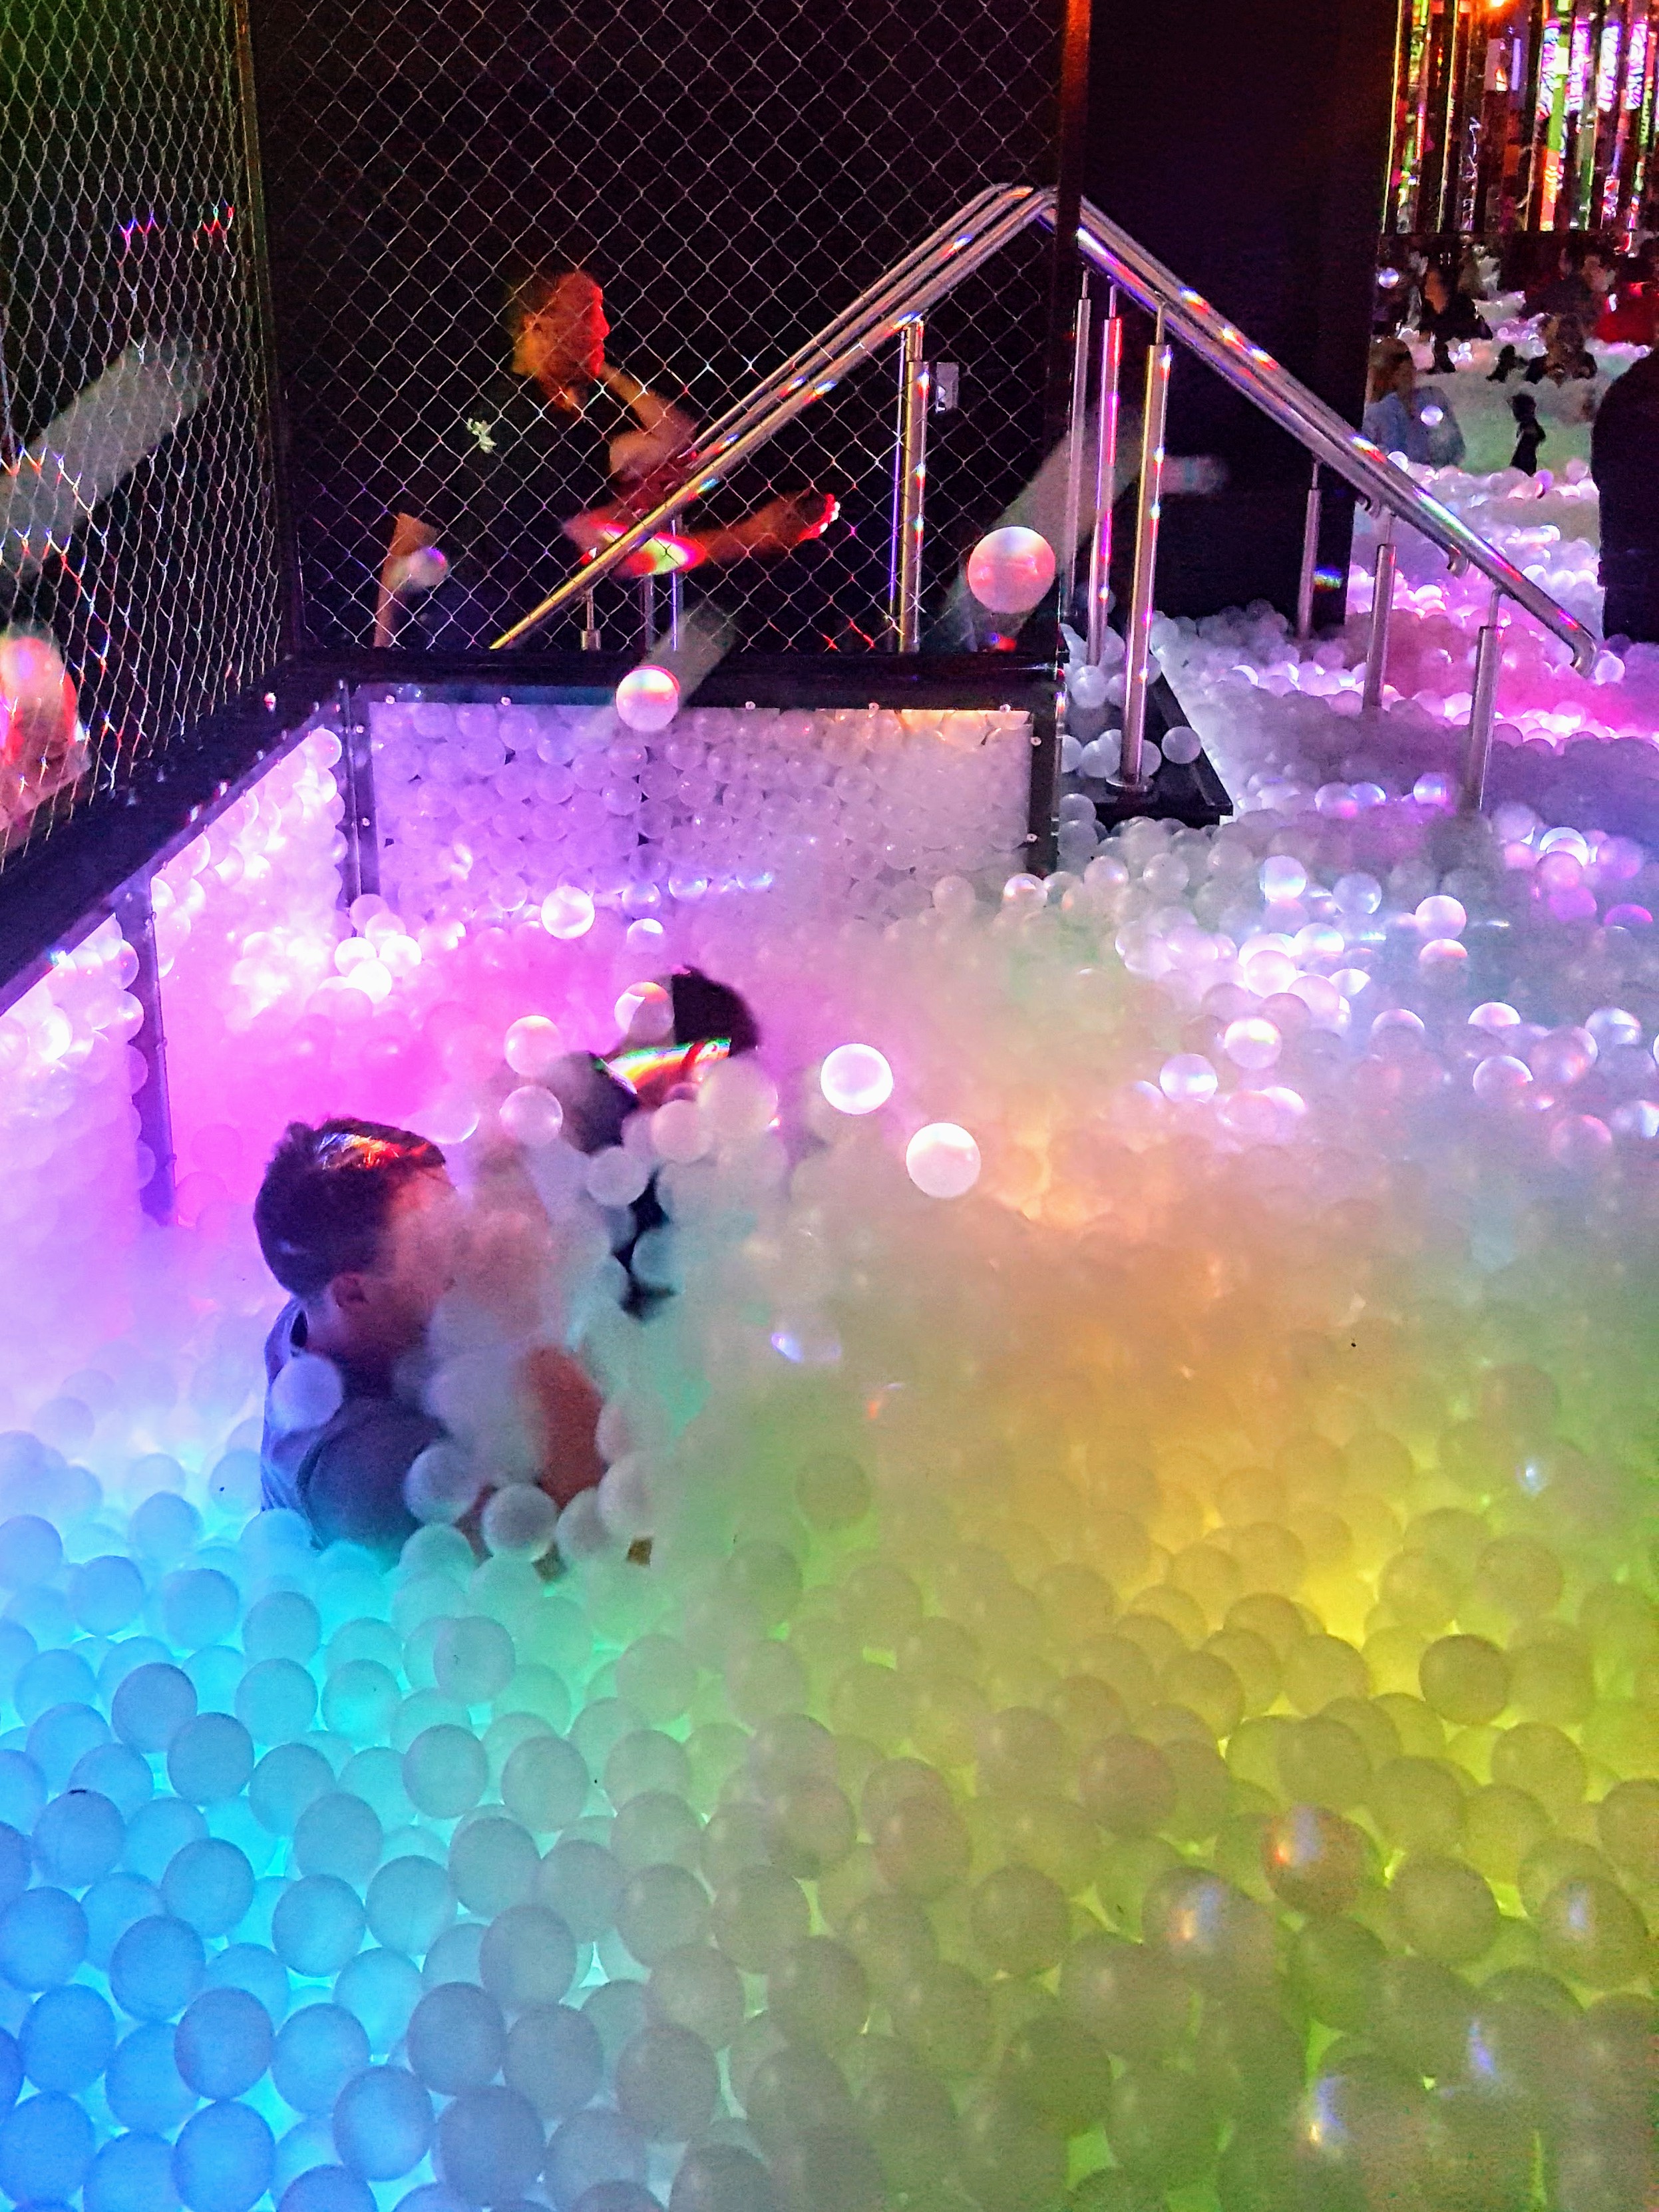 People in a ball pit at Ballie Ballerson Shoreditch throwing plastic balls at each other